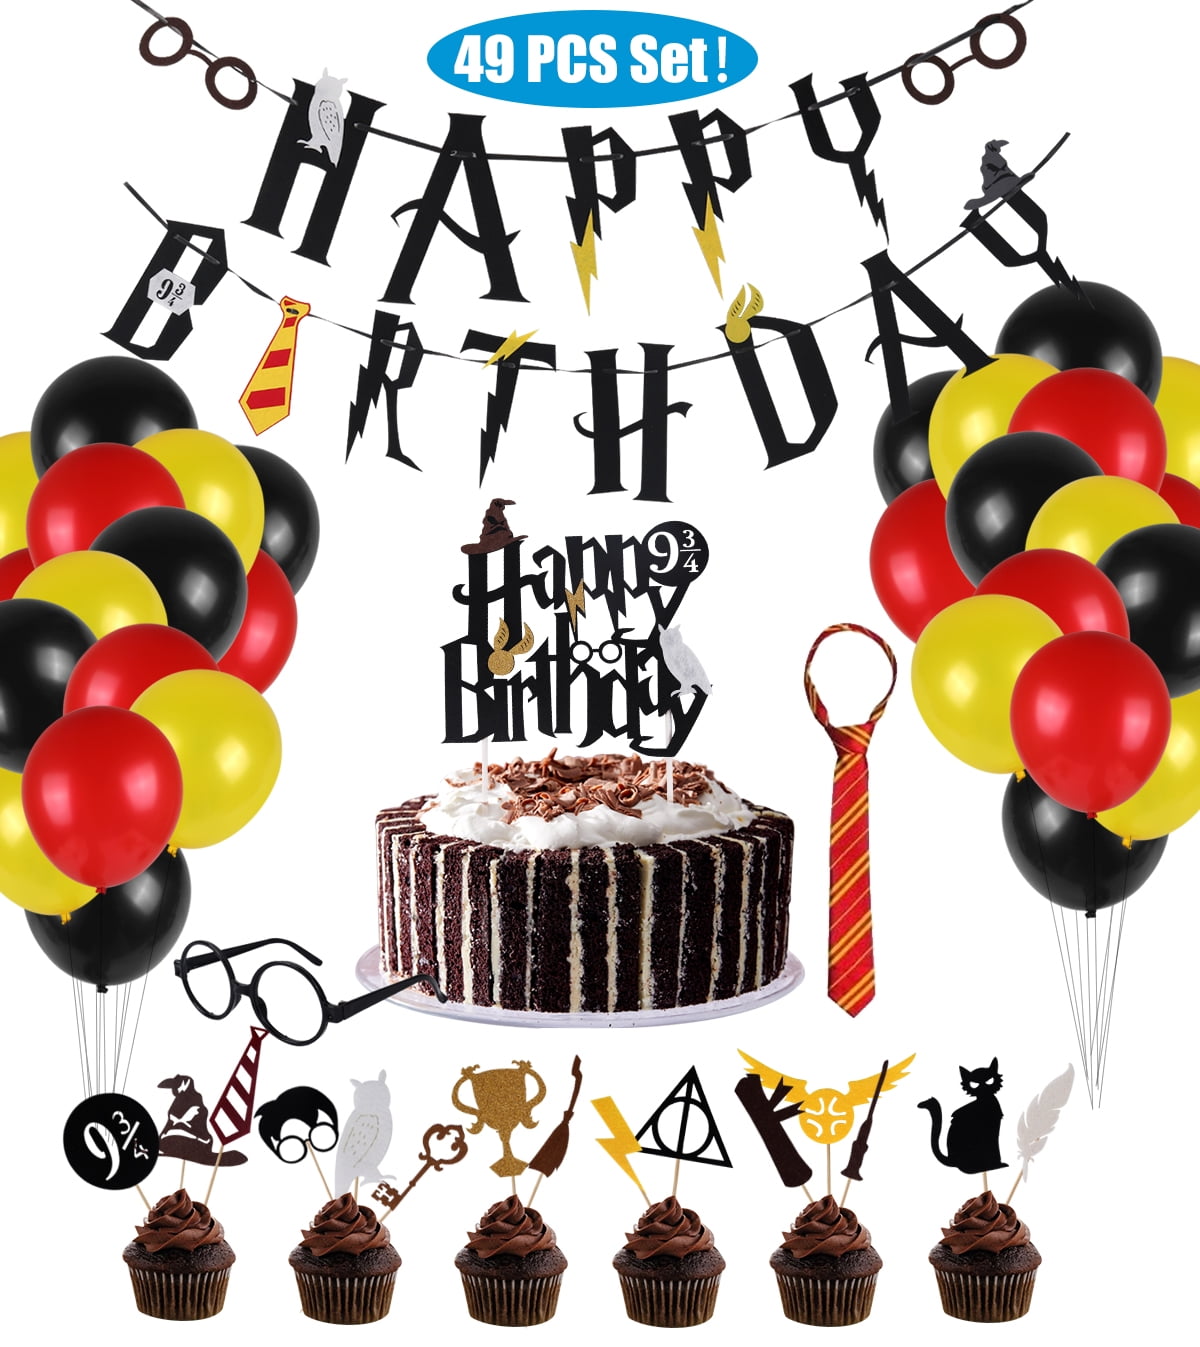 Harry Potter Birthay Party Supplies Decoration Bundle Pack includes Happy  Birthday Banner, Mini Honeycomb Table Decorations, Flag Banner, Hanging